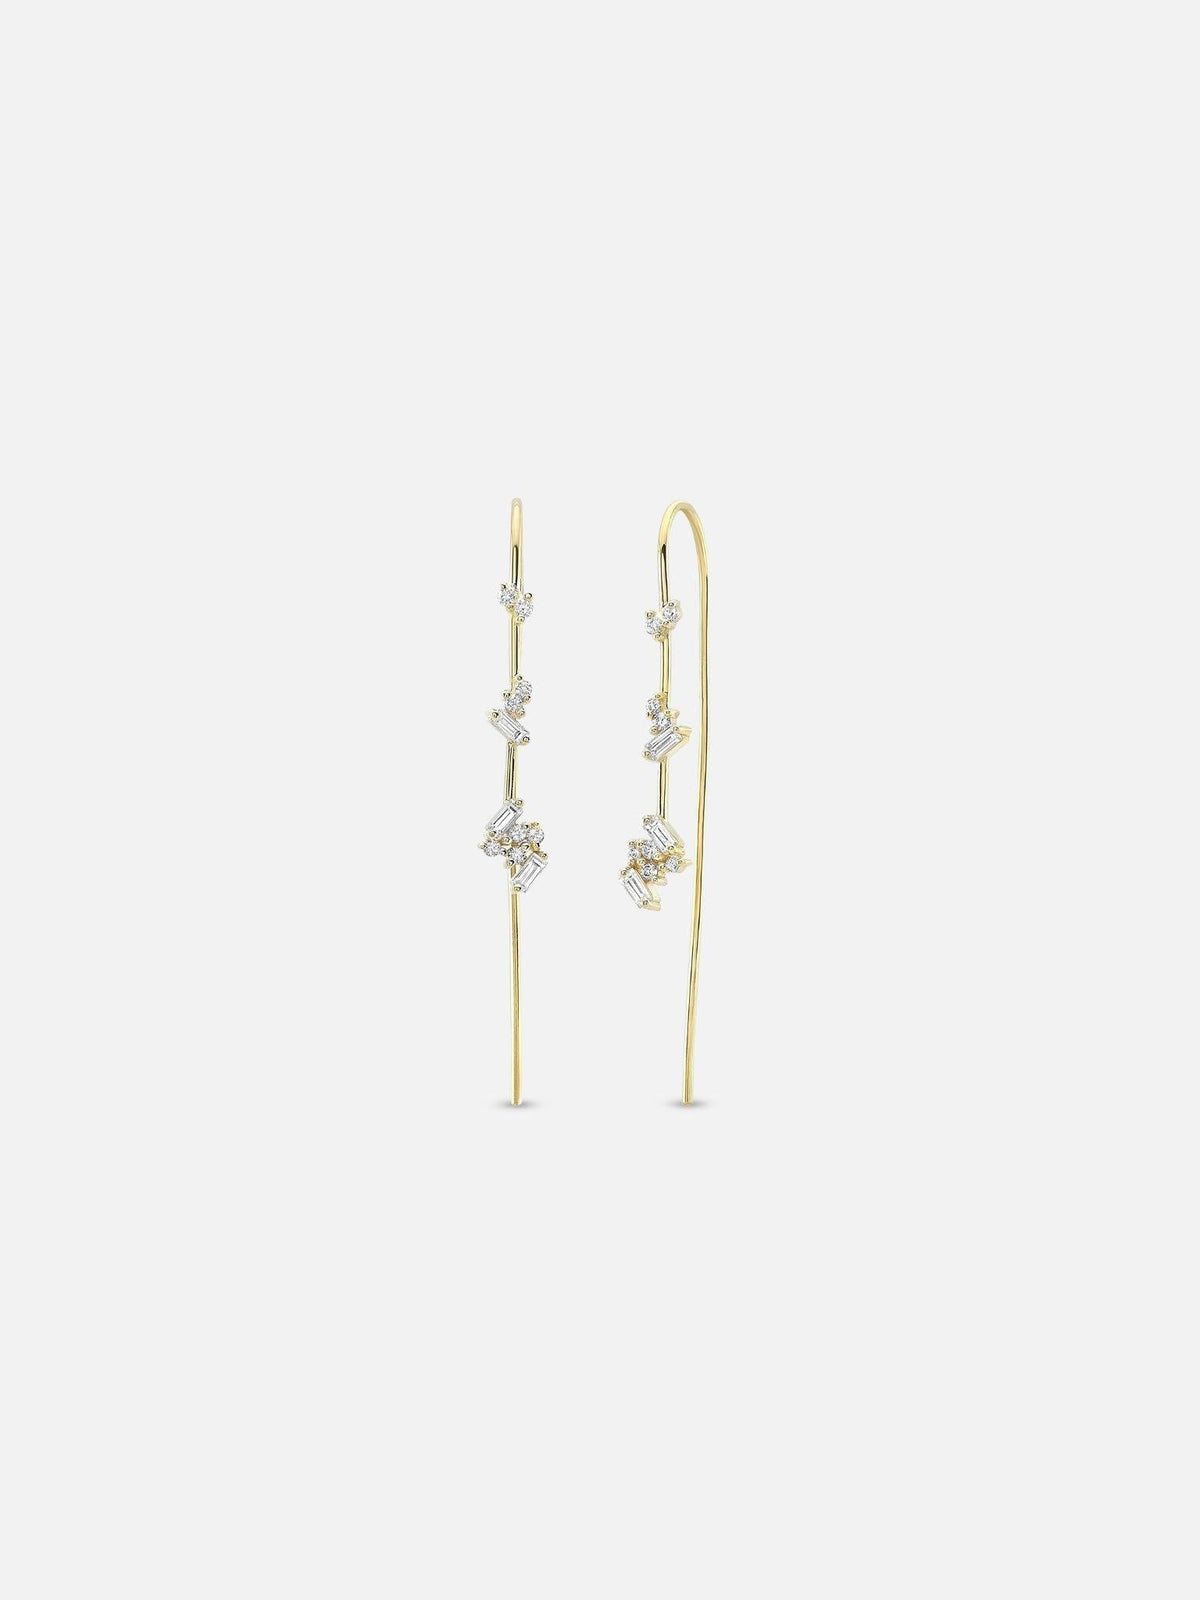 Meredith Young Luxe Diamond Threaders 1